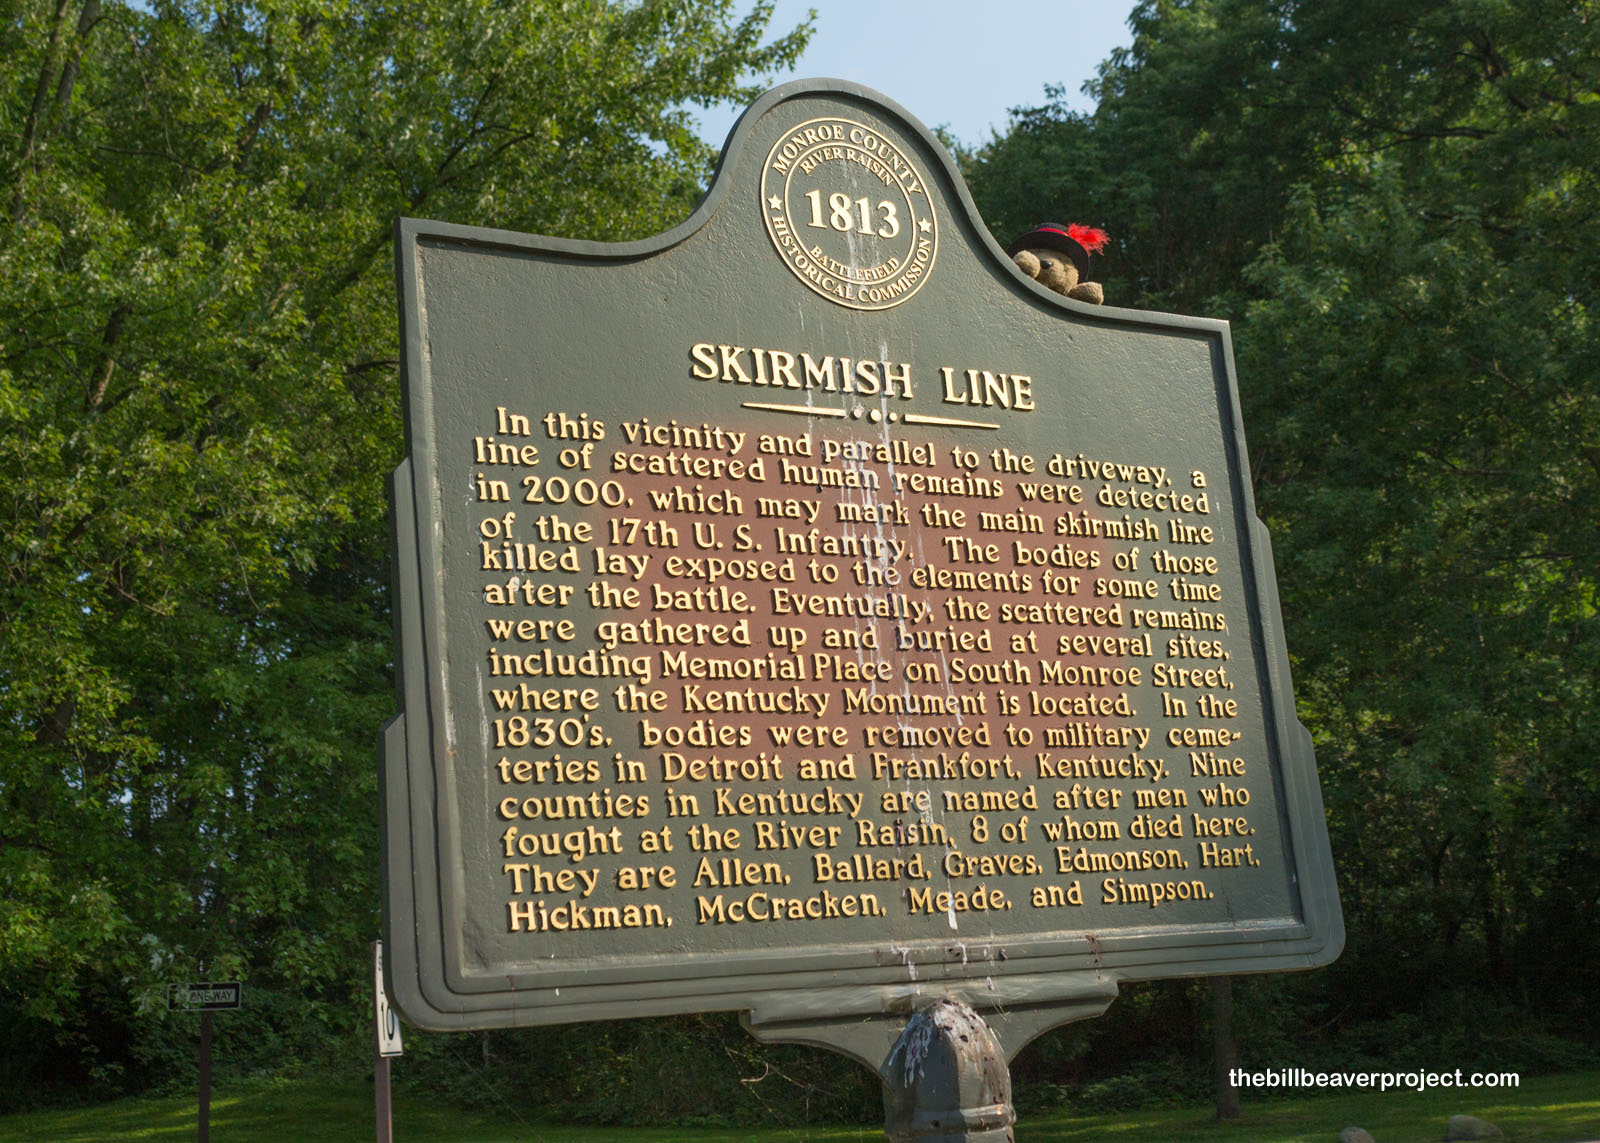 This plaque marks the main skirmish line of the 17th U.S. Infantry!